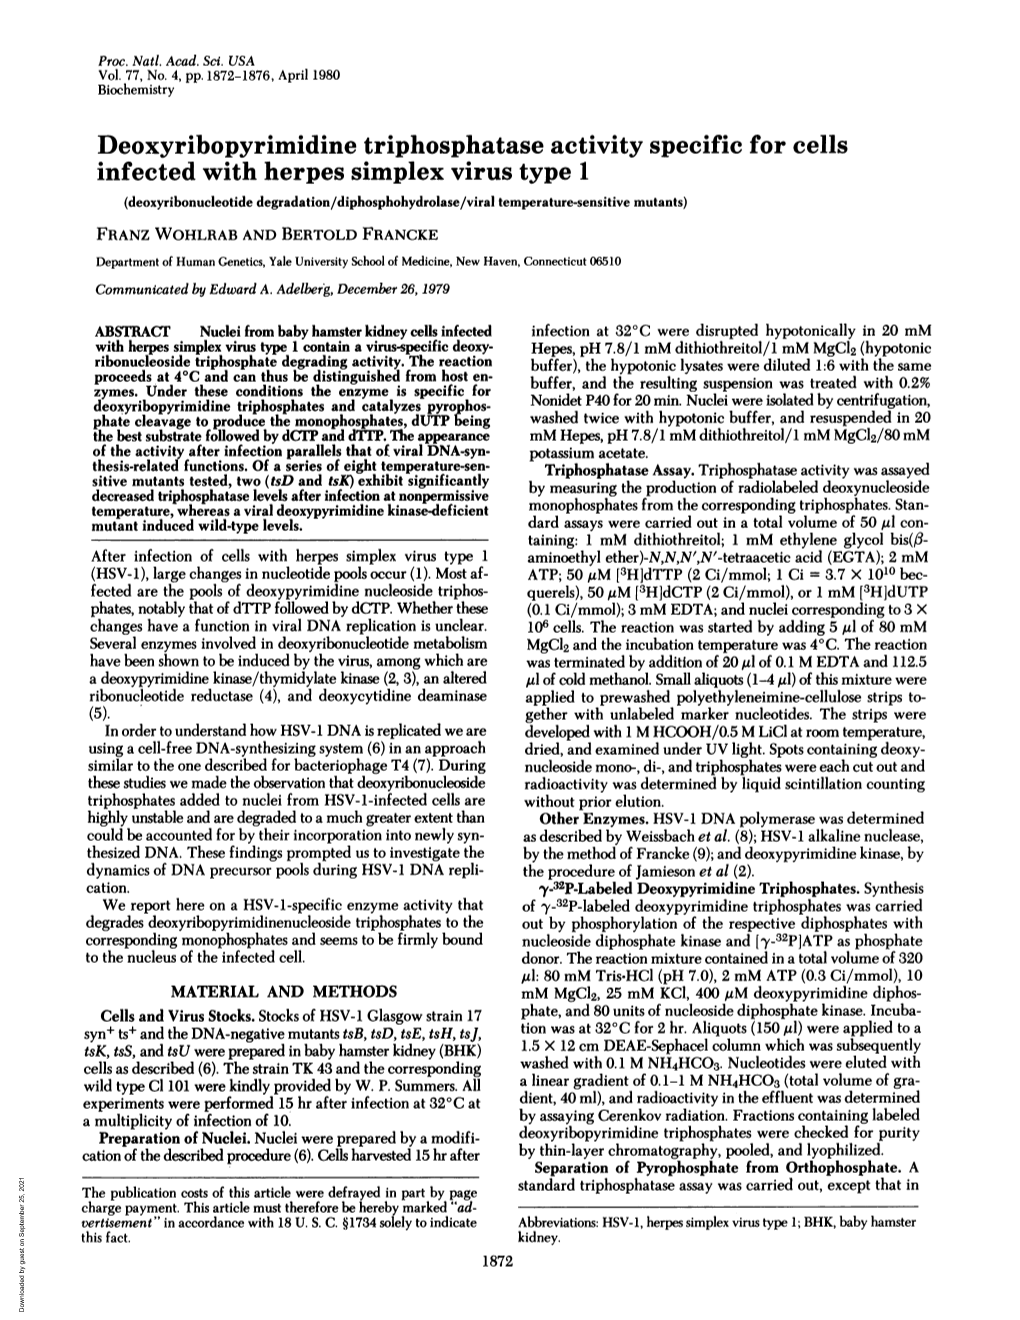 Deoxyribopyrimidine Triphosphatase Activity Specific for Cells Infected